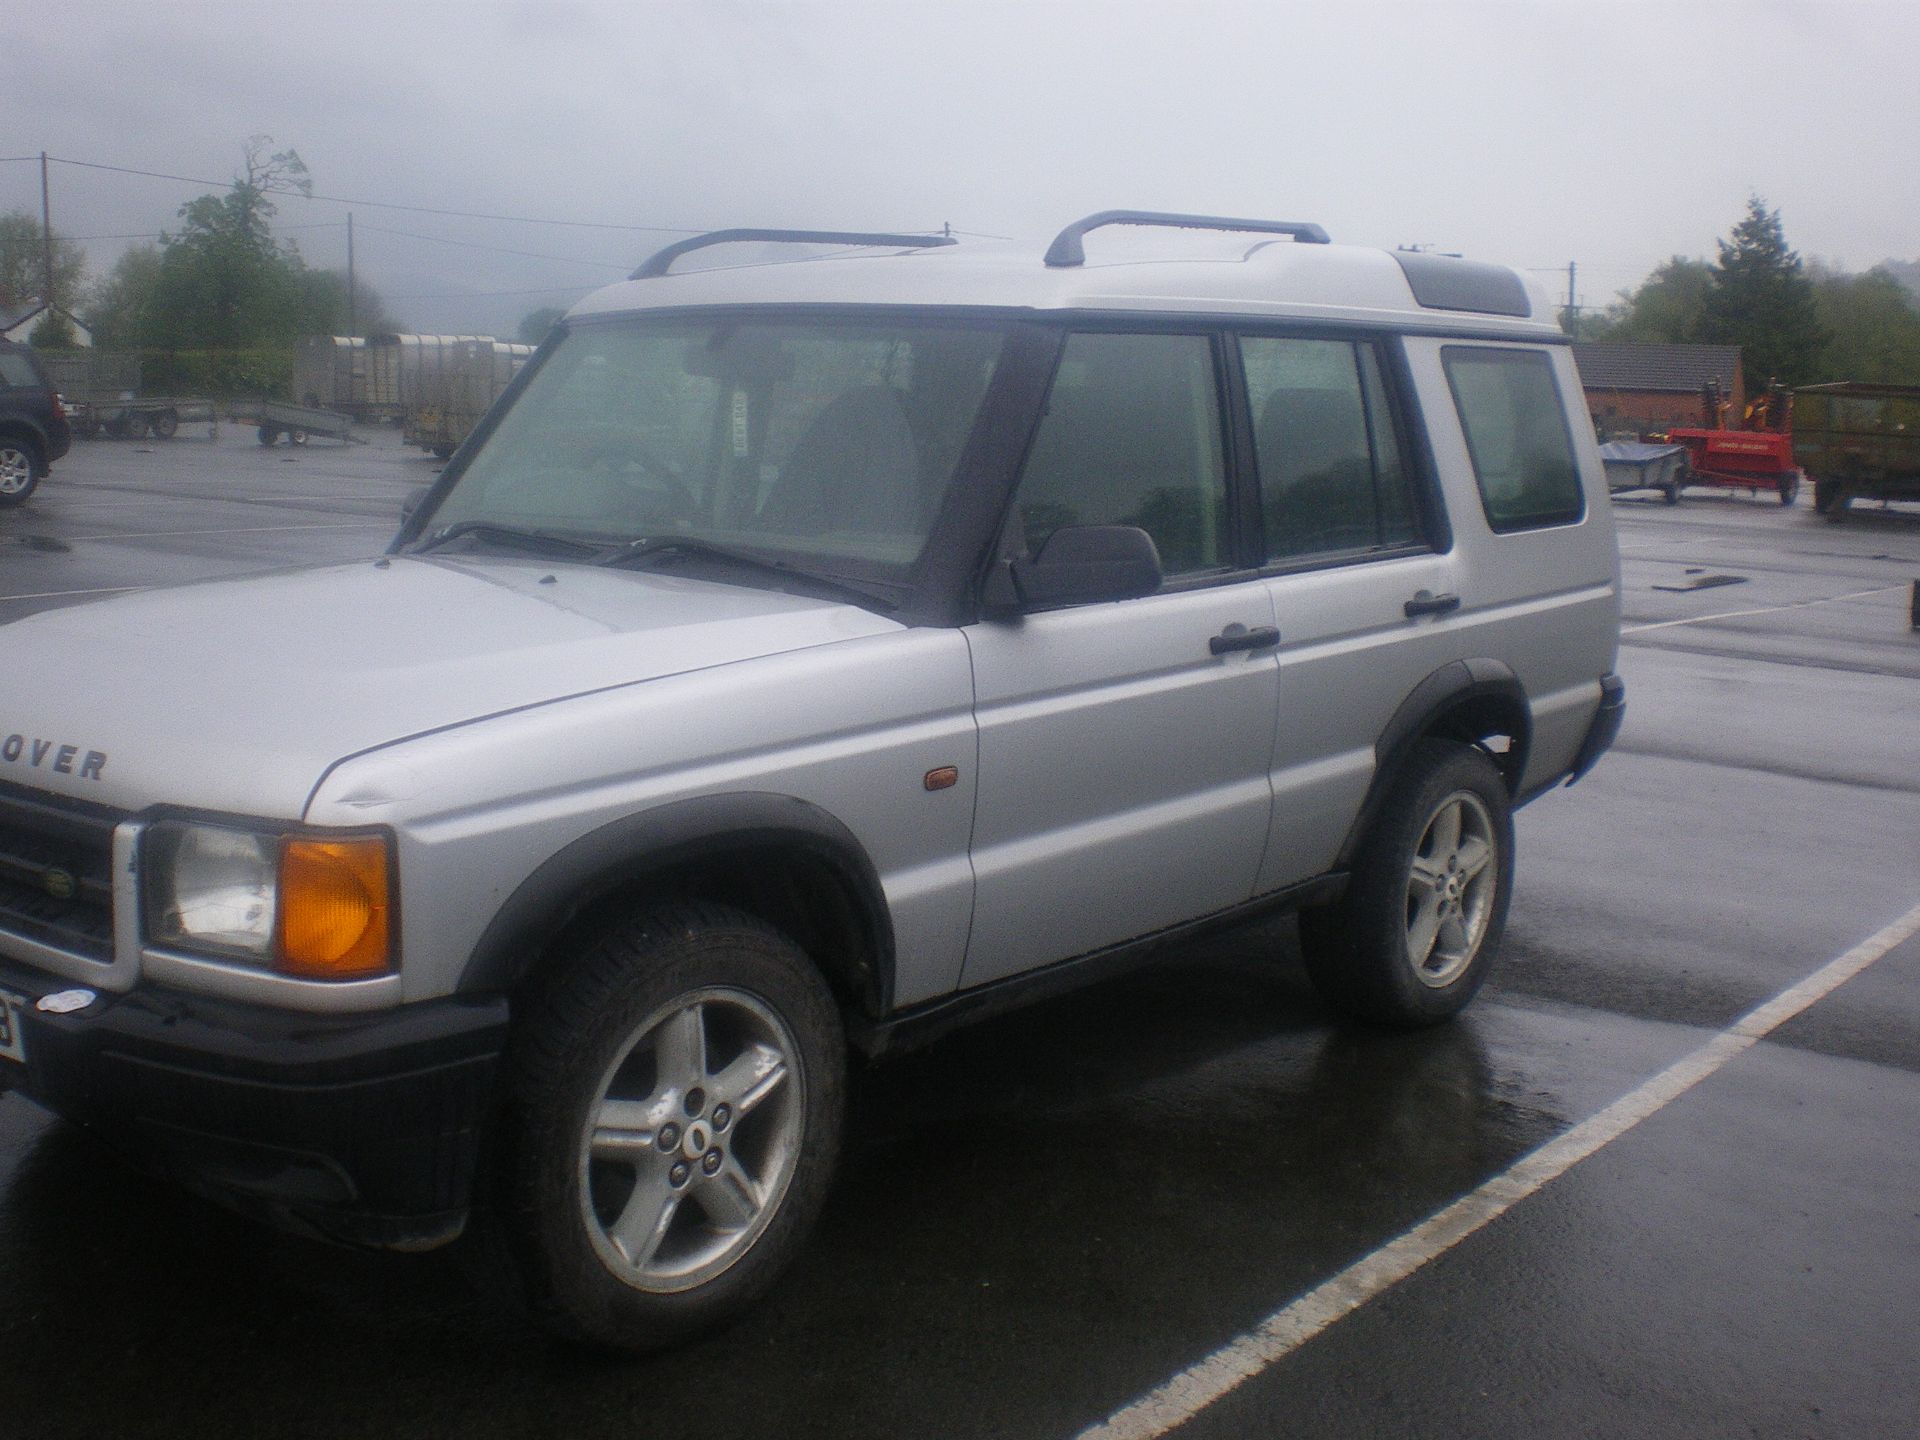 LANDROVER DISCOVERY 2002 - Image 2 of 3